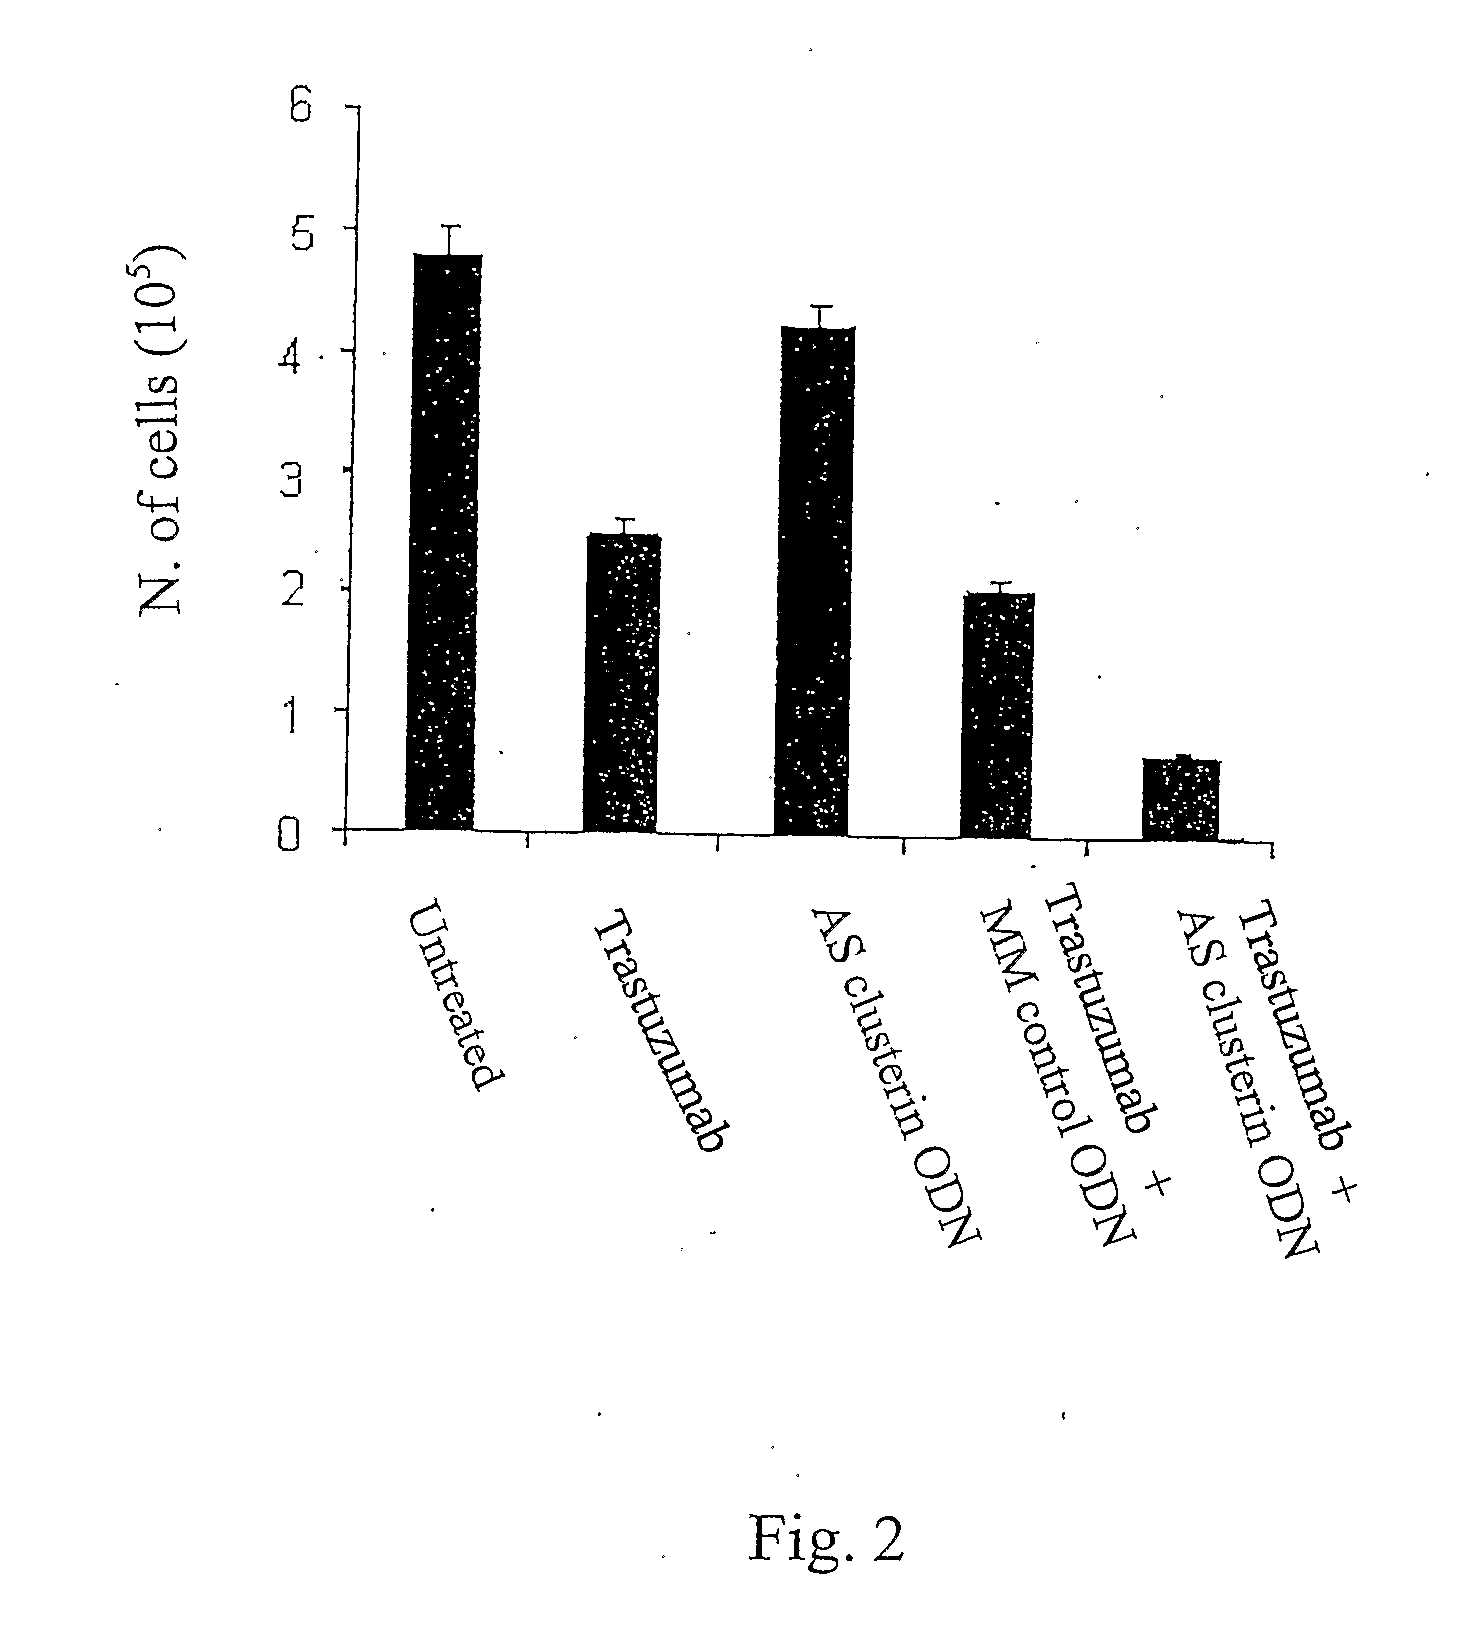 Treatment of Cancer With a Combination of an Agent that Perturbs the EGF Signaling Pathway and an Oligonucleotide that Reduces Clusterin Levels